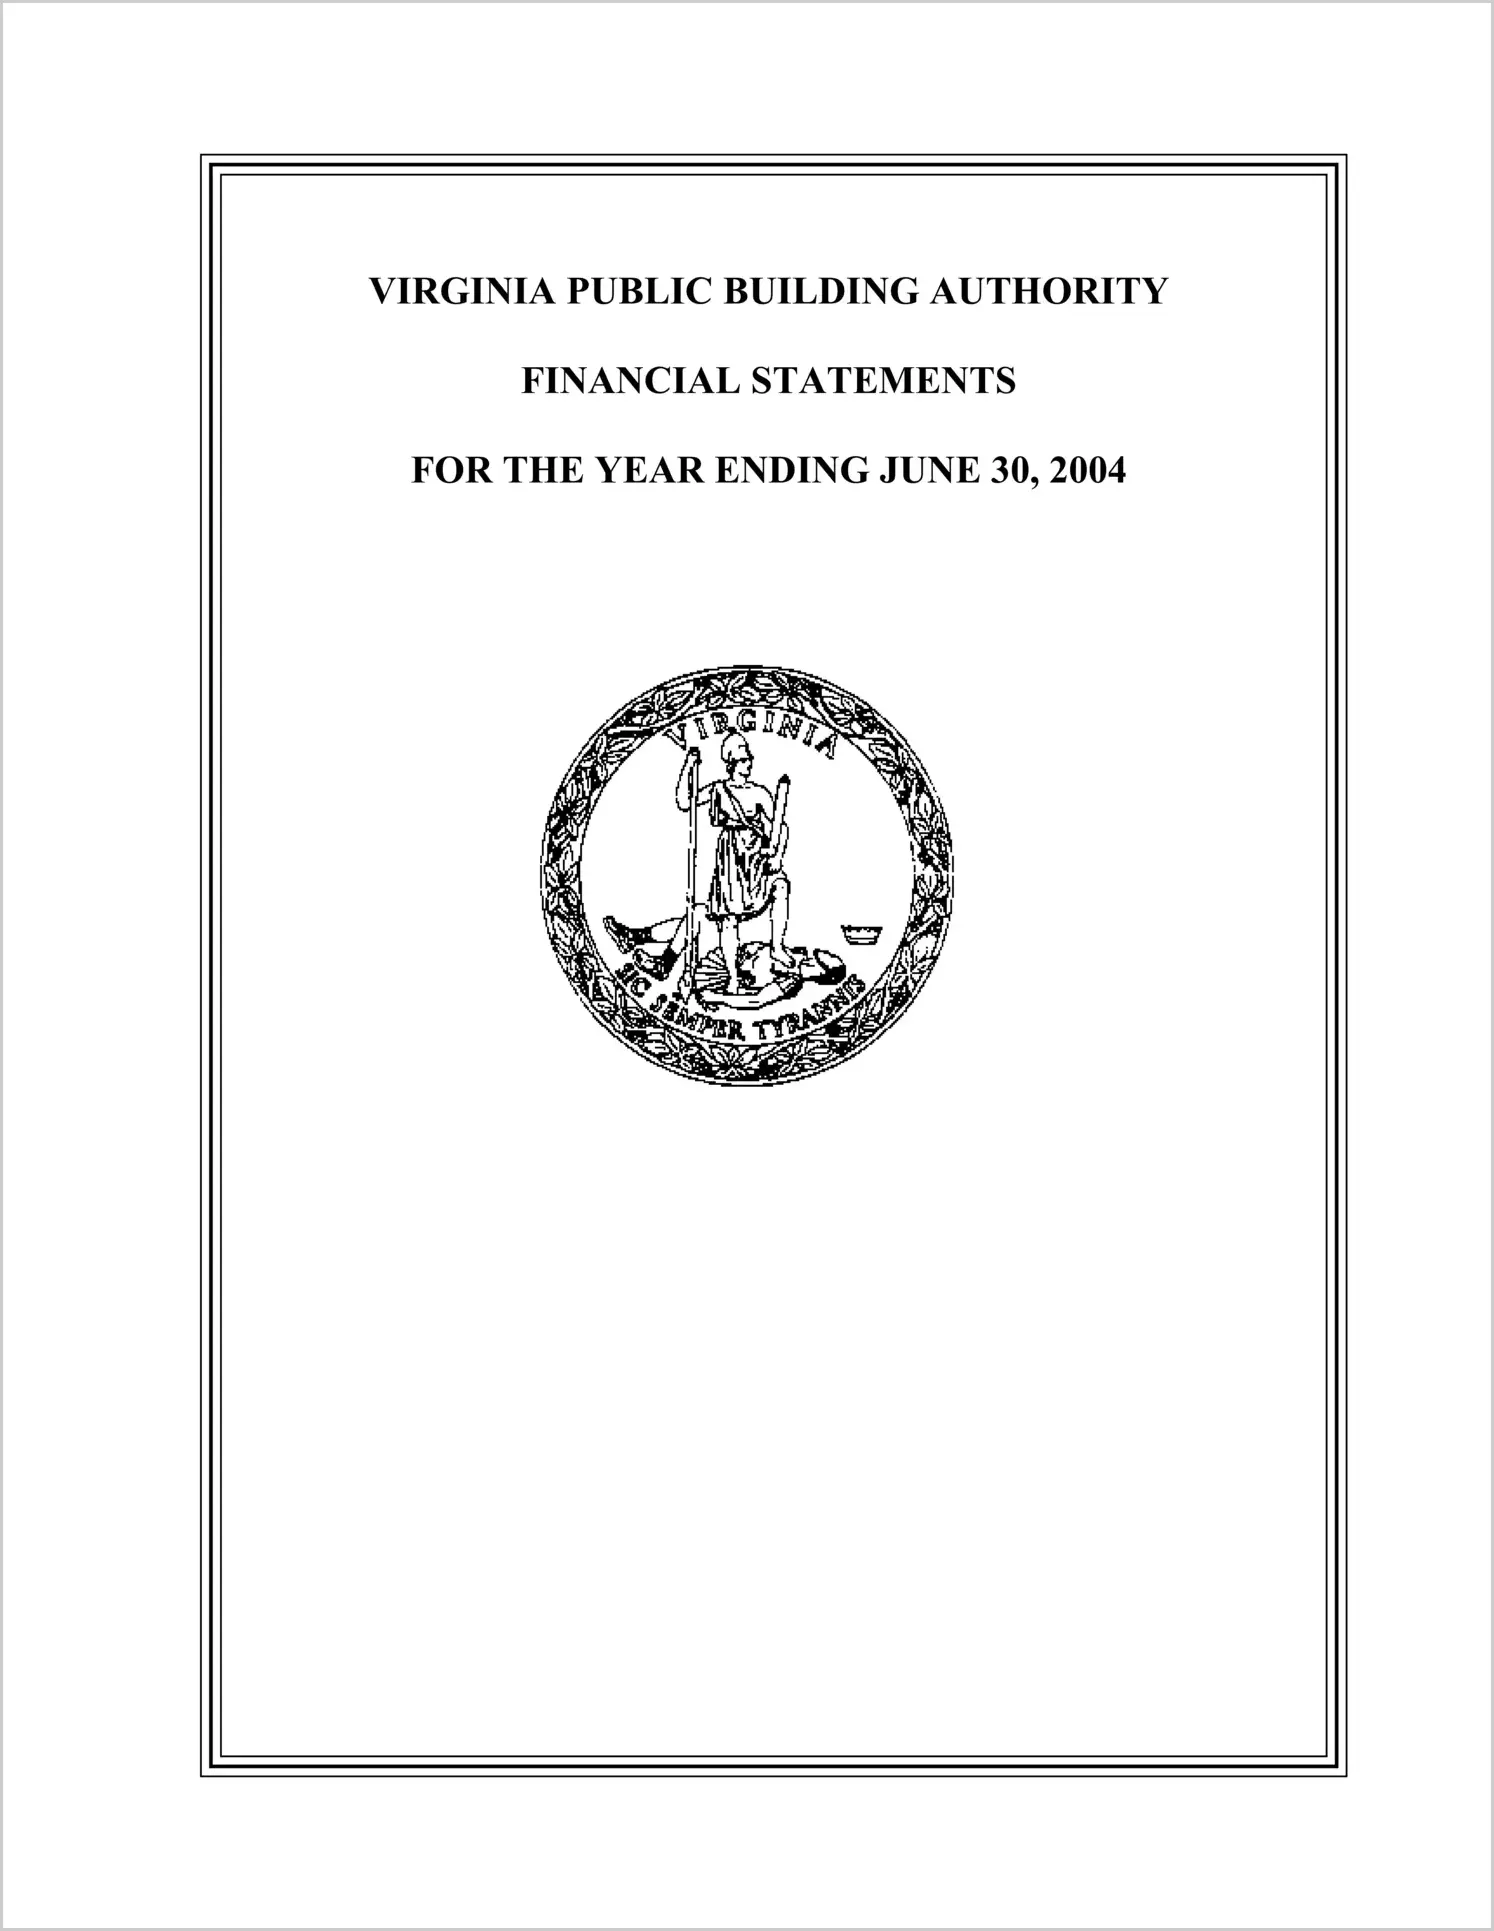 Virginia Public Building Authority for the year ended June 30, 2004